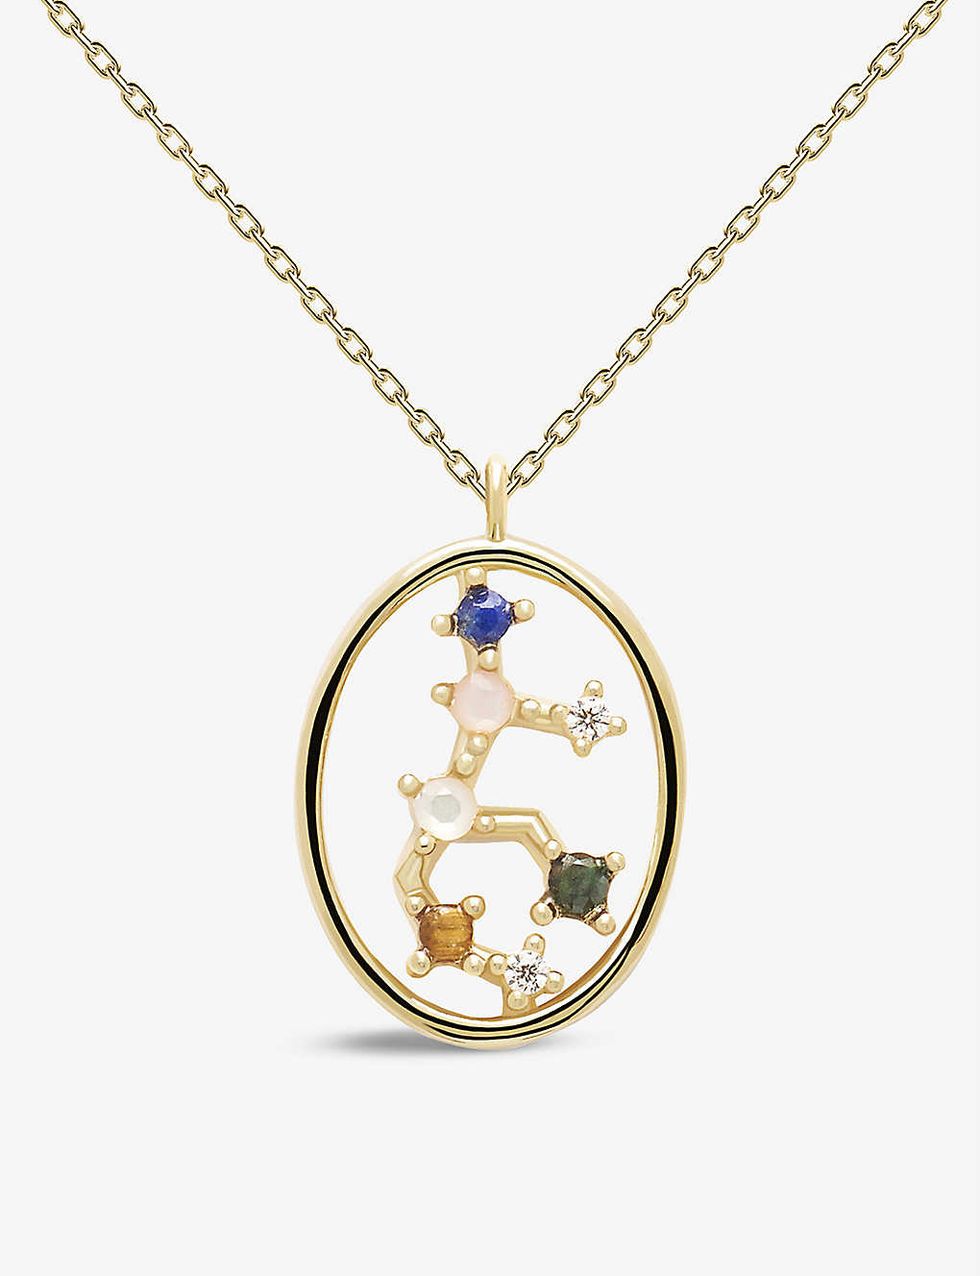 Zodiac Virgo 18ct gold-plated sterling silver and gemstone necklace